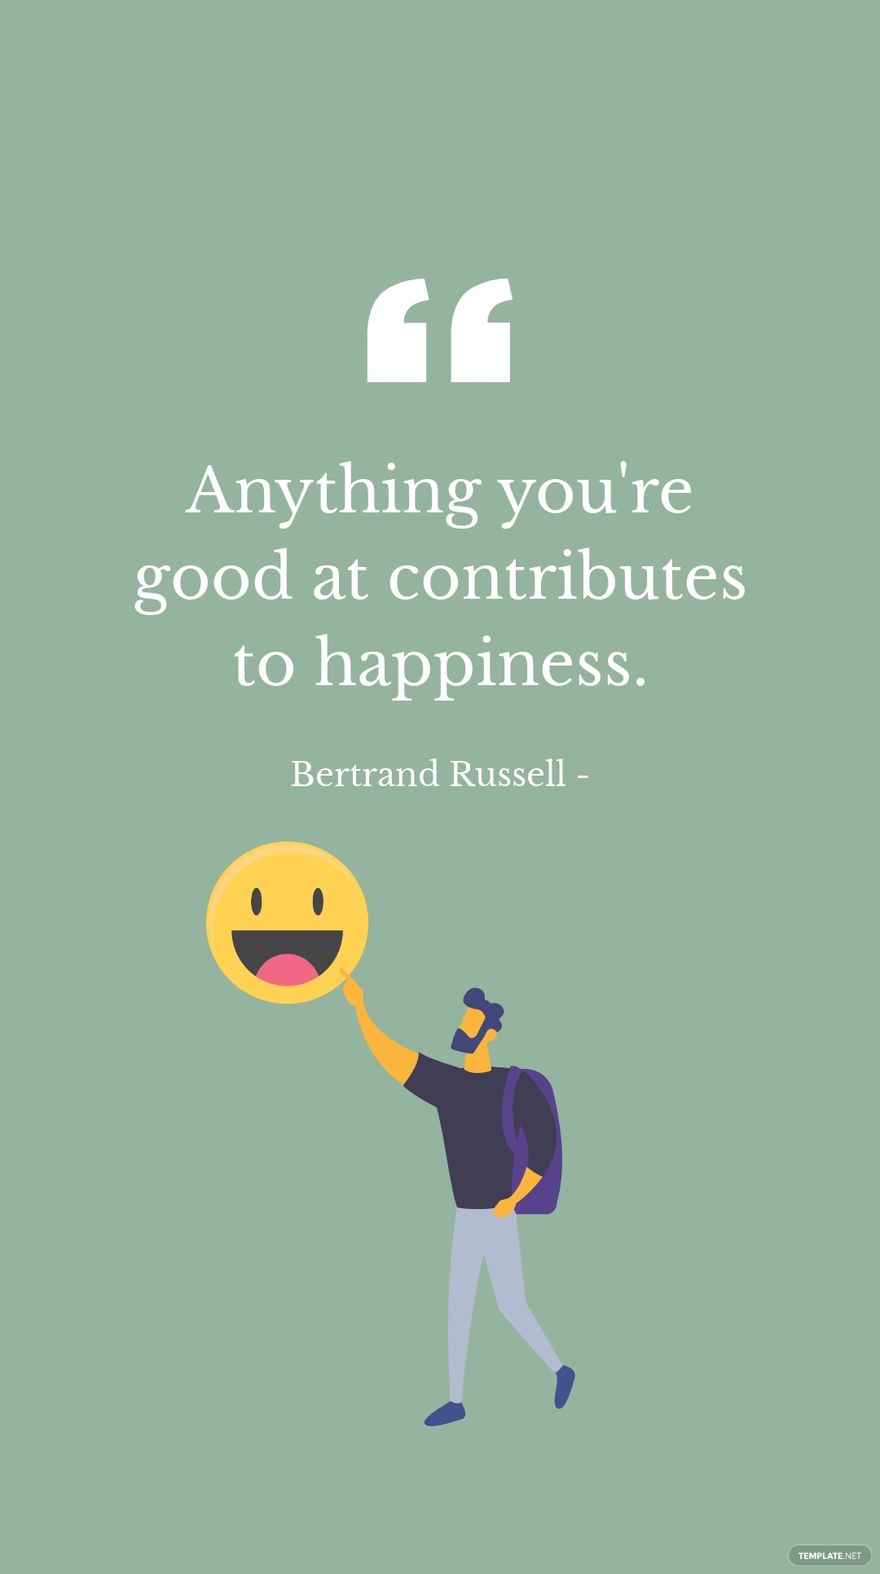 Free Bertrand Russell - Anything you're good at contributes to happiness. in JPG